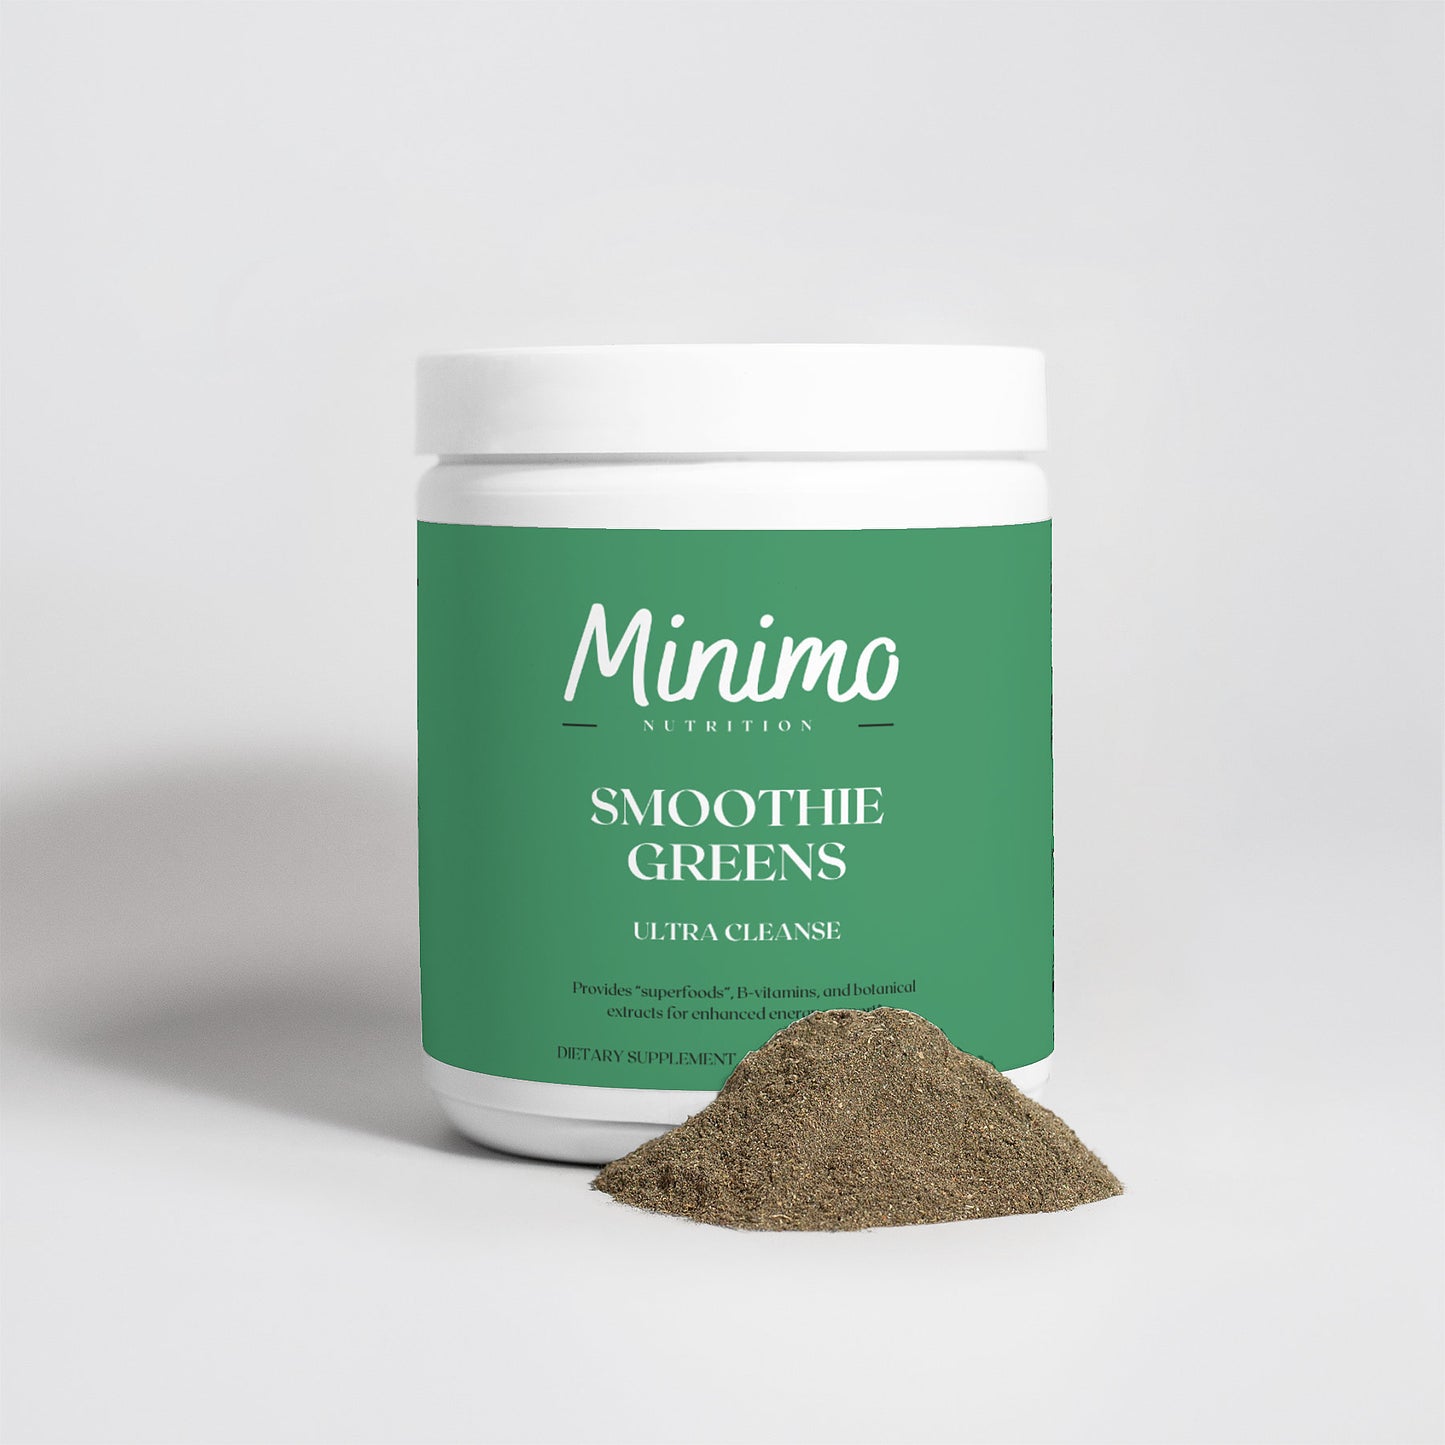 Minimo Nutrition Ultra Cleanse Smoothie Greens, 8.8 oz.